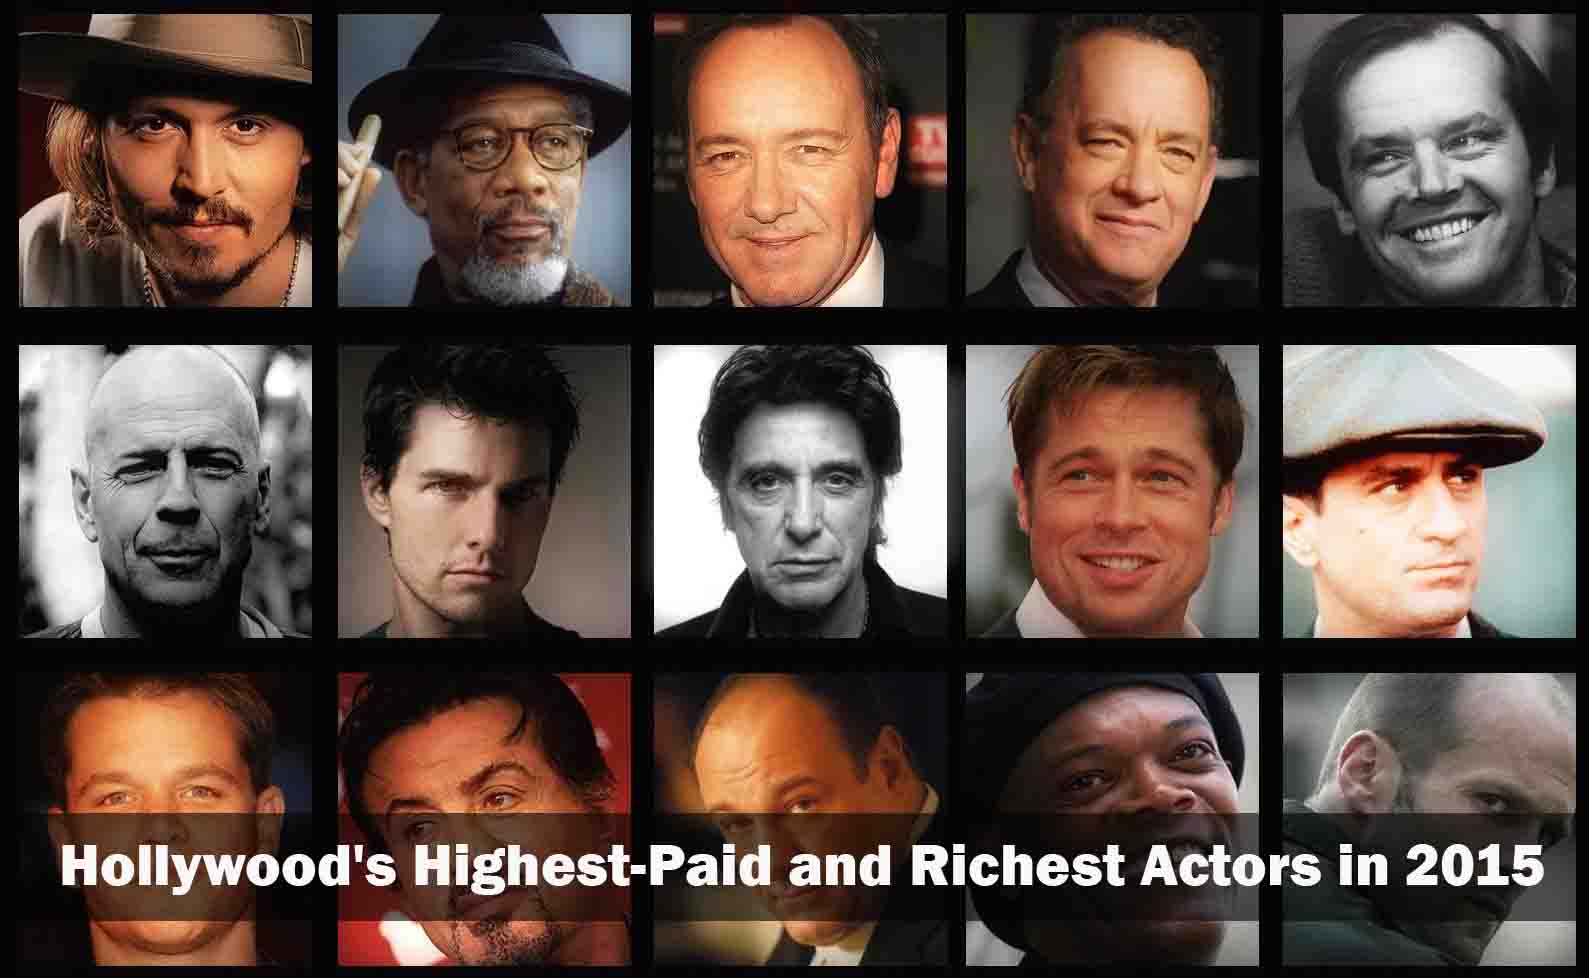 Hollywood's Highest-Paid and richest Actors in 2015